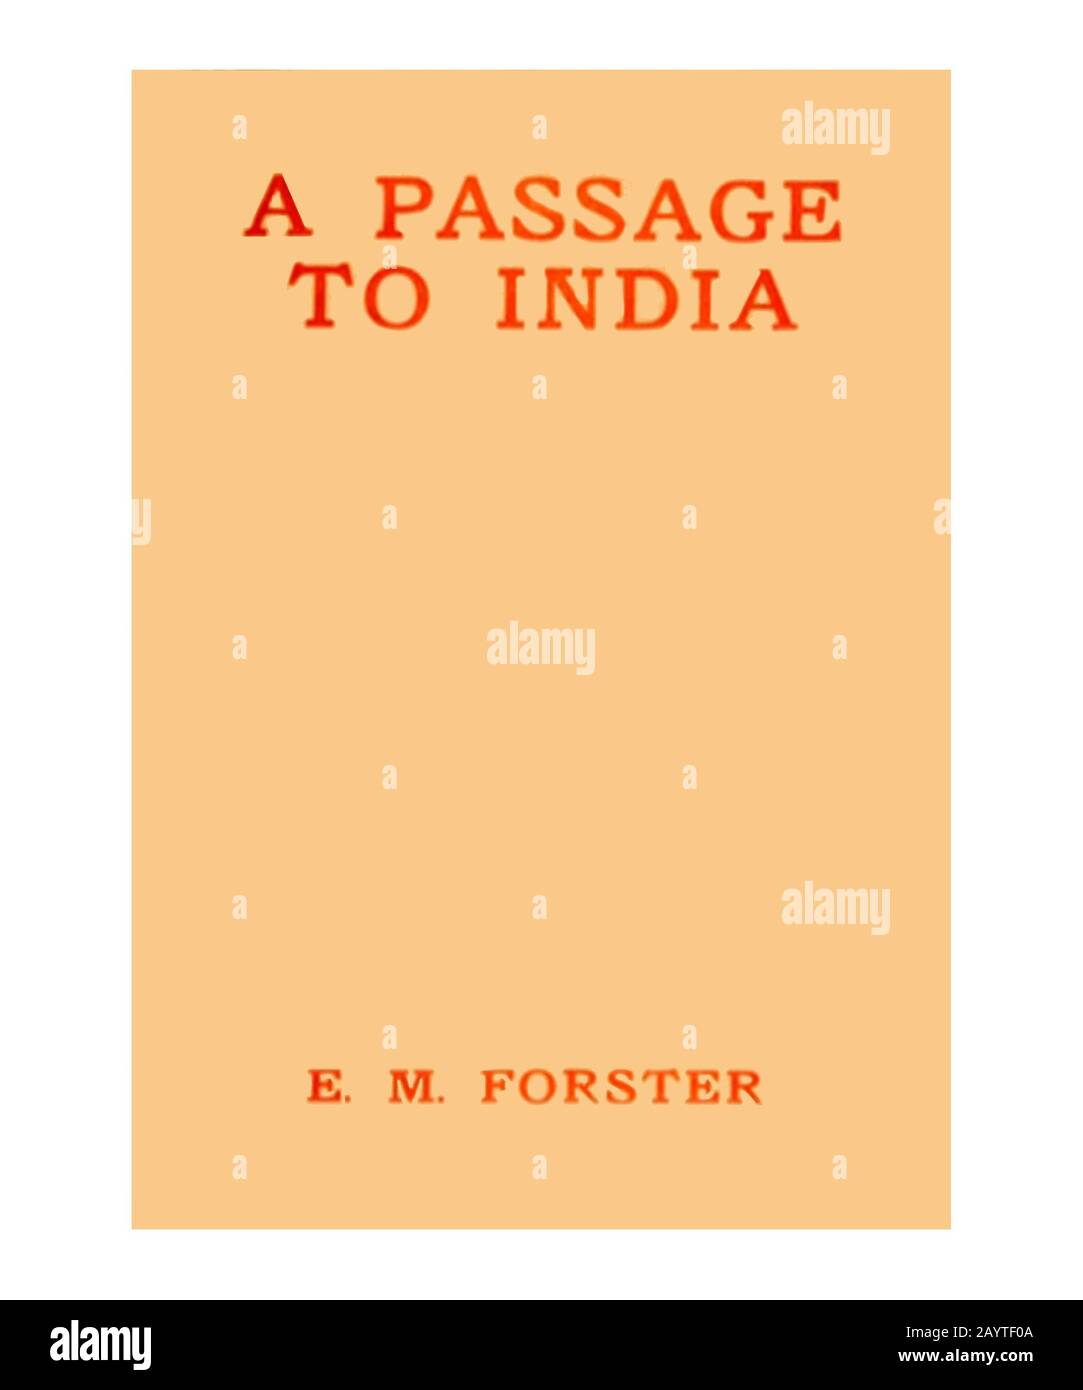 Forster A Passage to India Book Cover Cleaned and reset Stock Photo